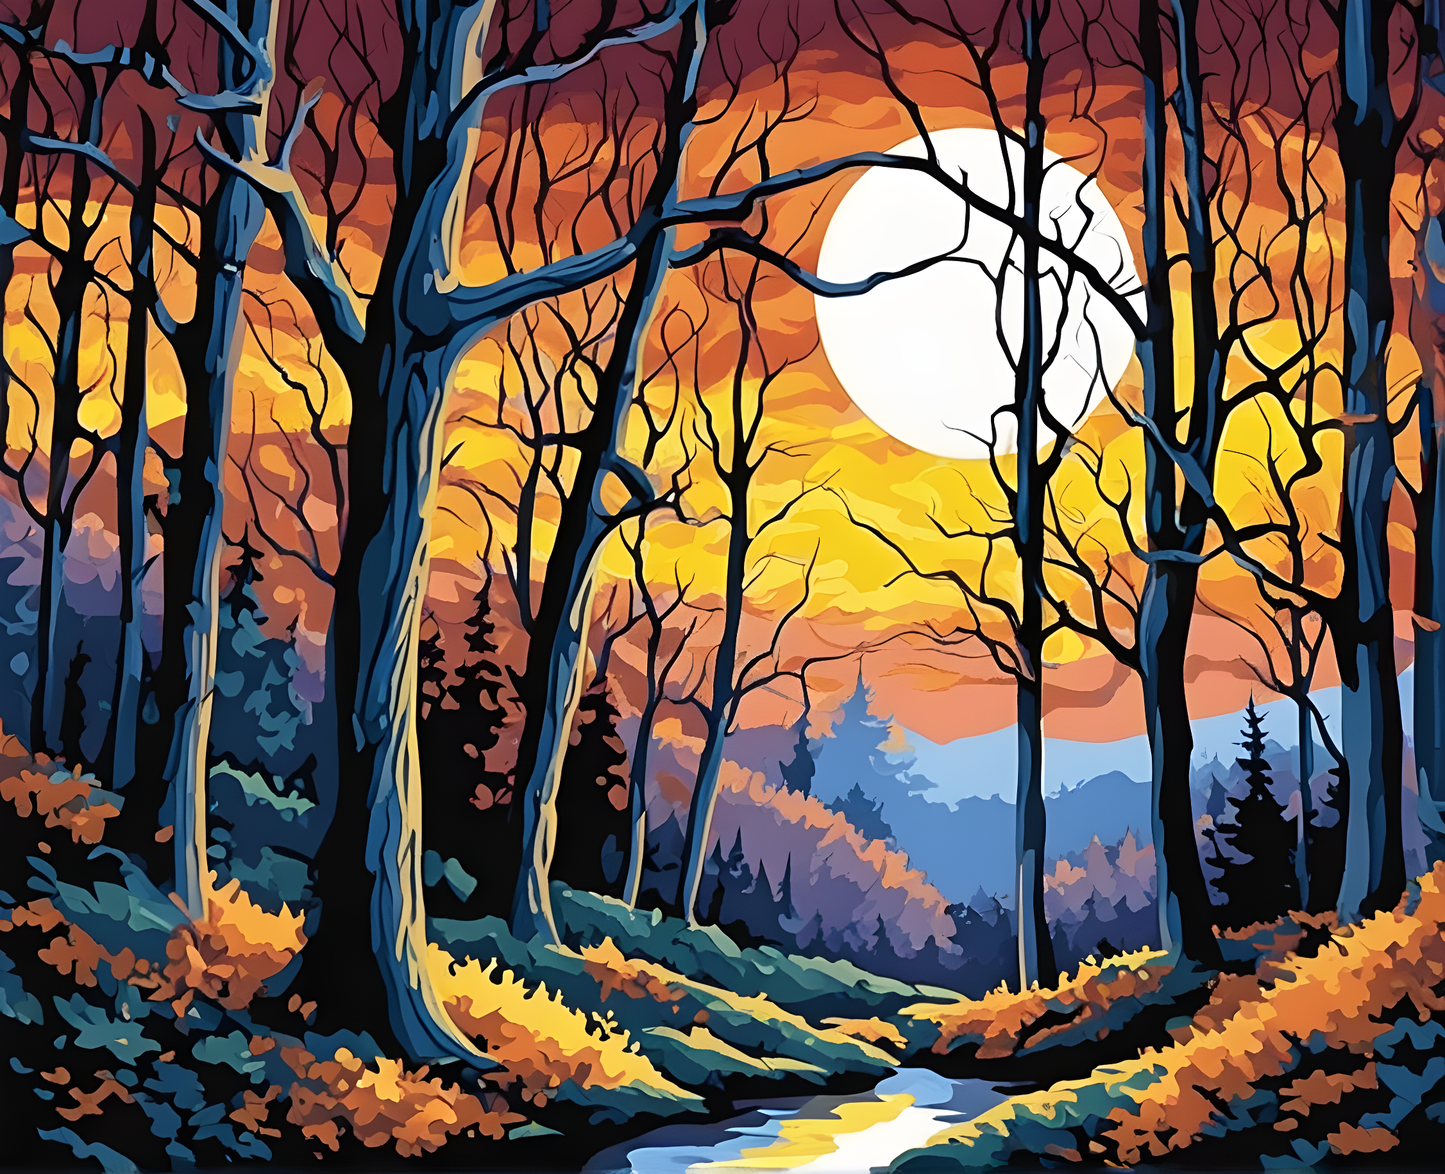 A Touch of Moonlight in The Twilight Forest - Van-Go Paint-By-Number Kit